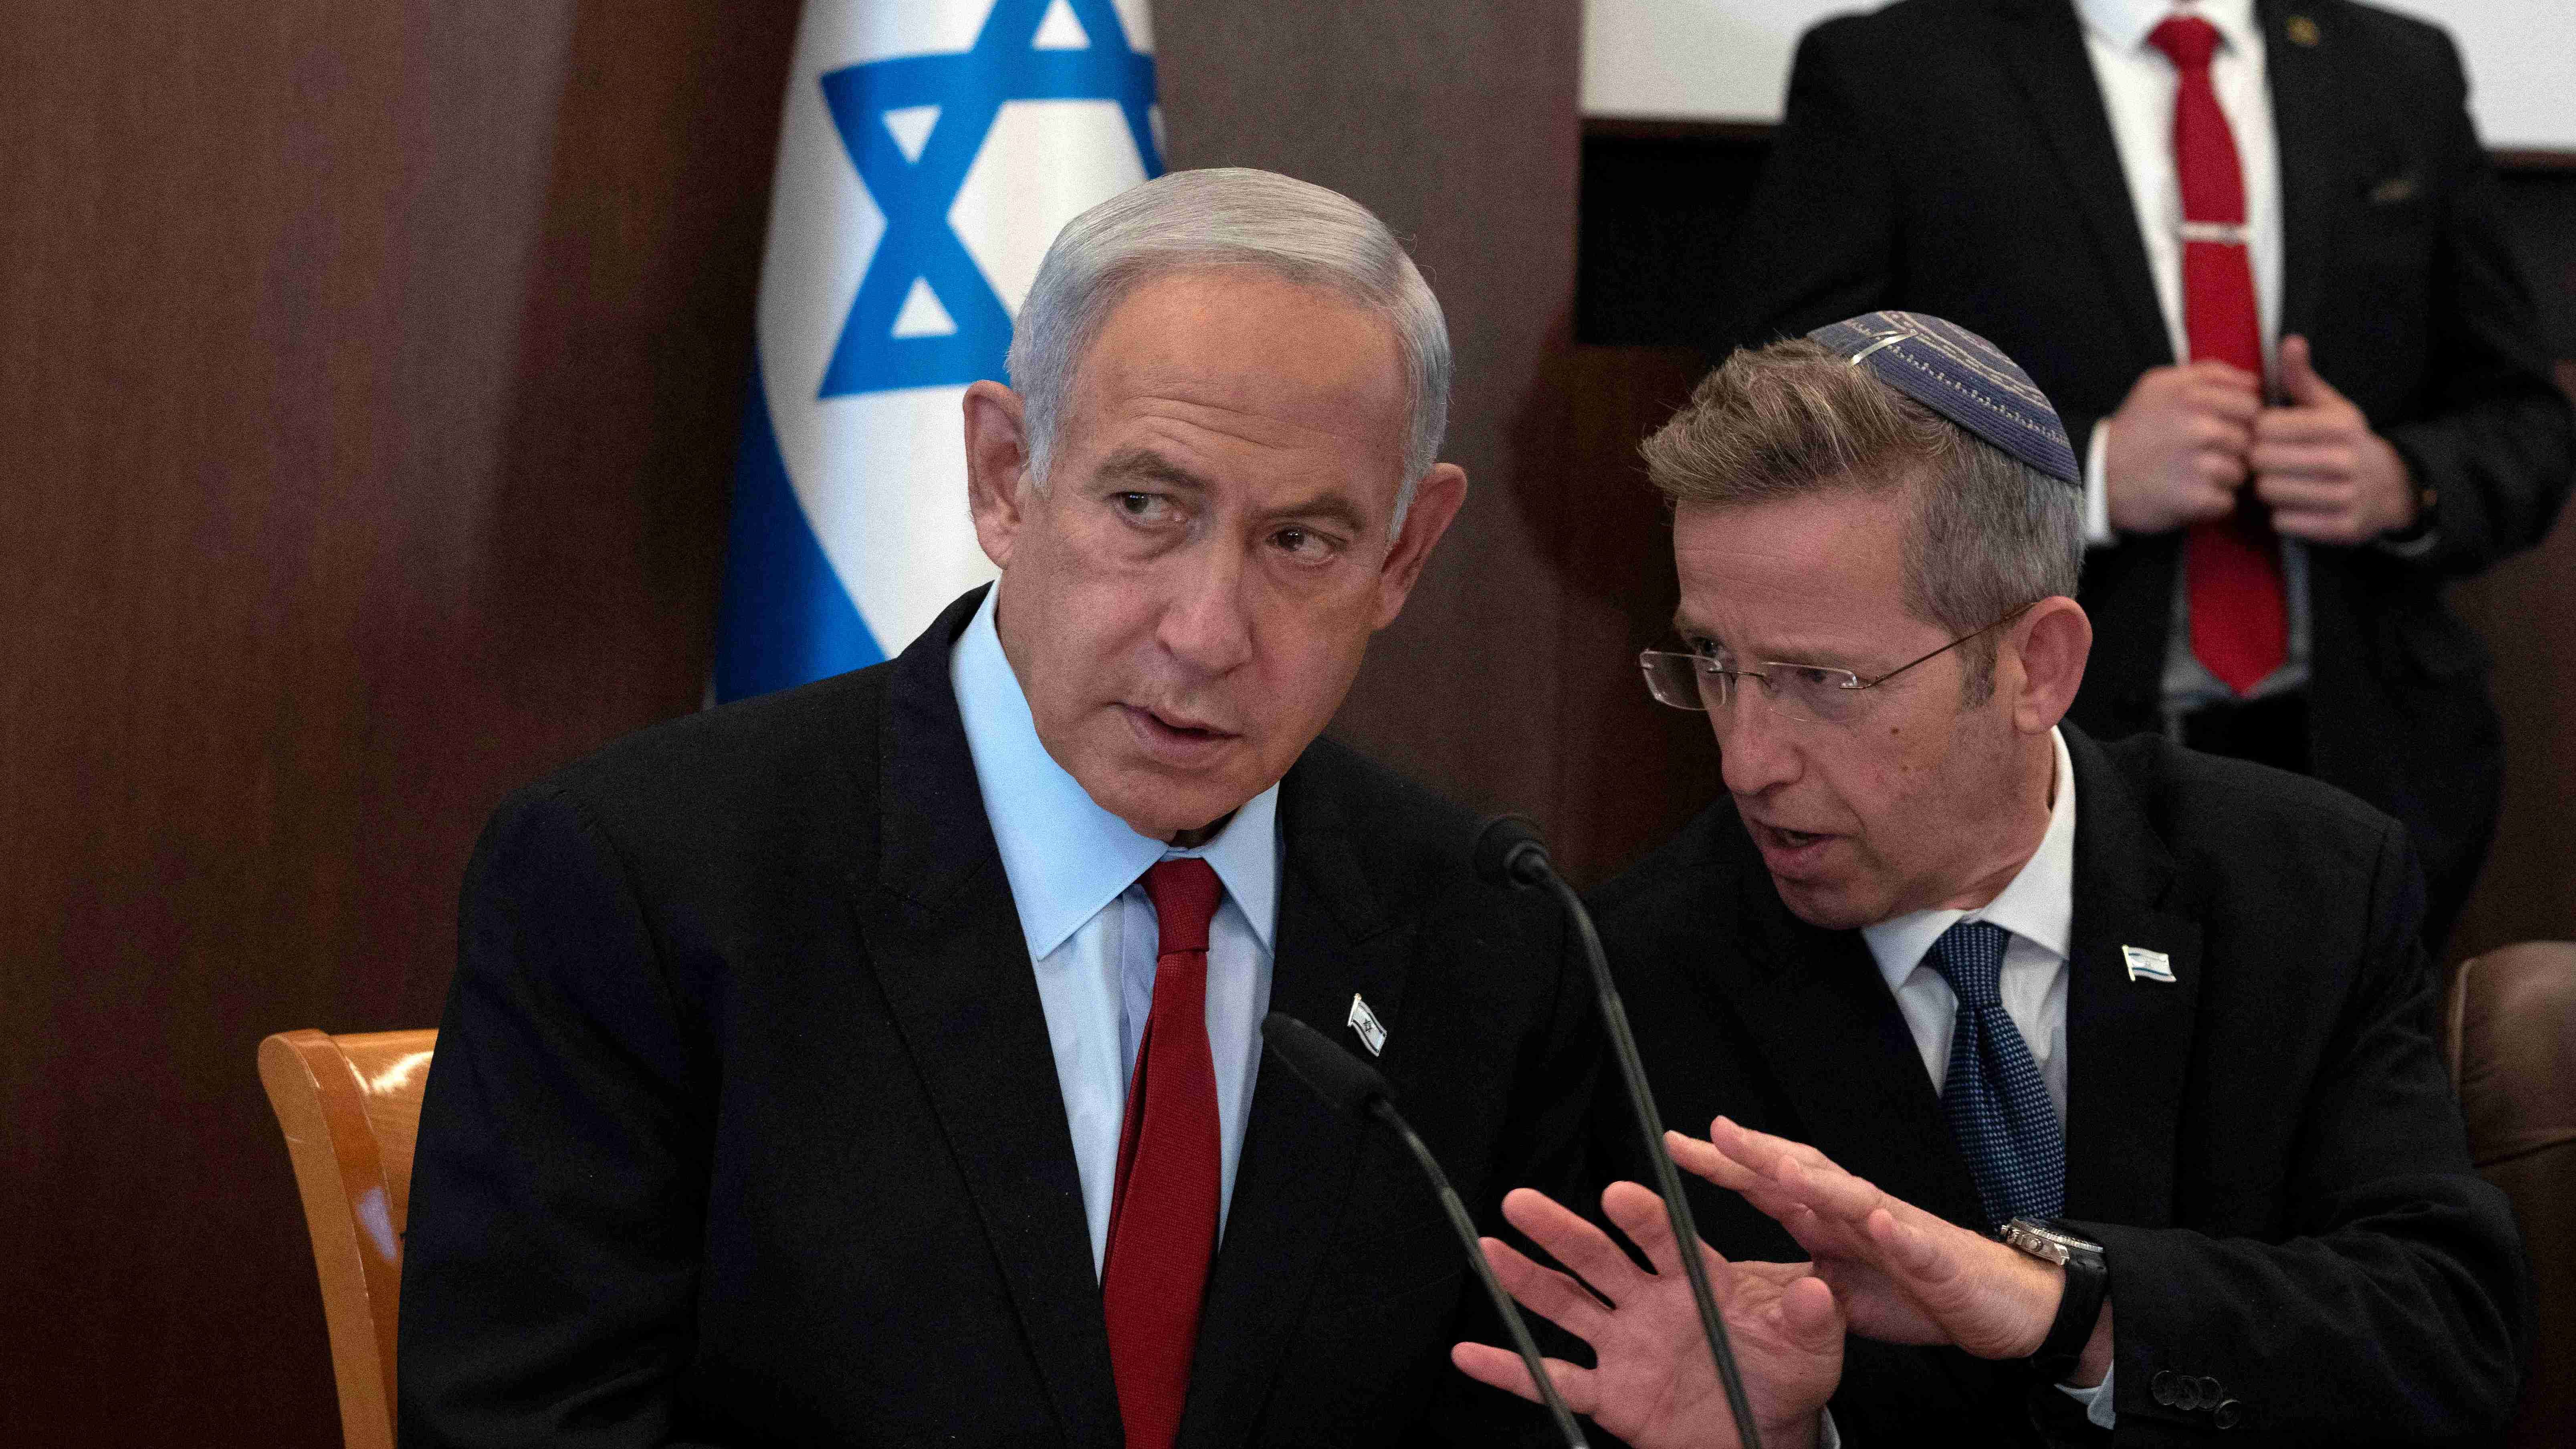  Netanyahu's far-right government wants to weaken the Supreme Court, limit judicial oversight and grant more power to politicians. Credit: AFP Photo